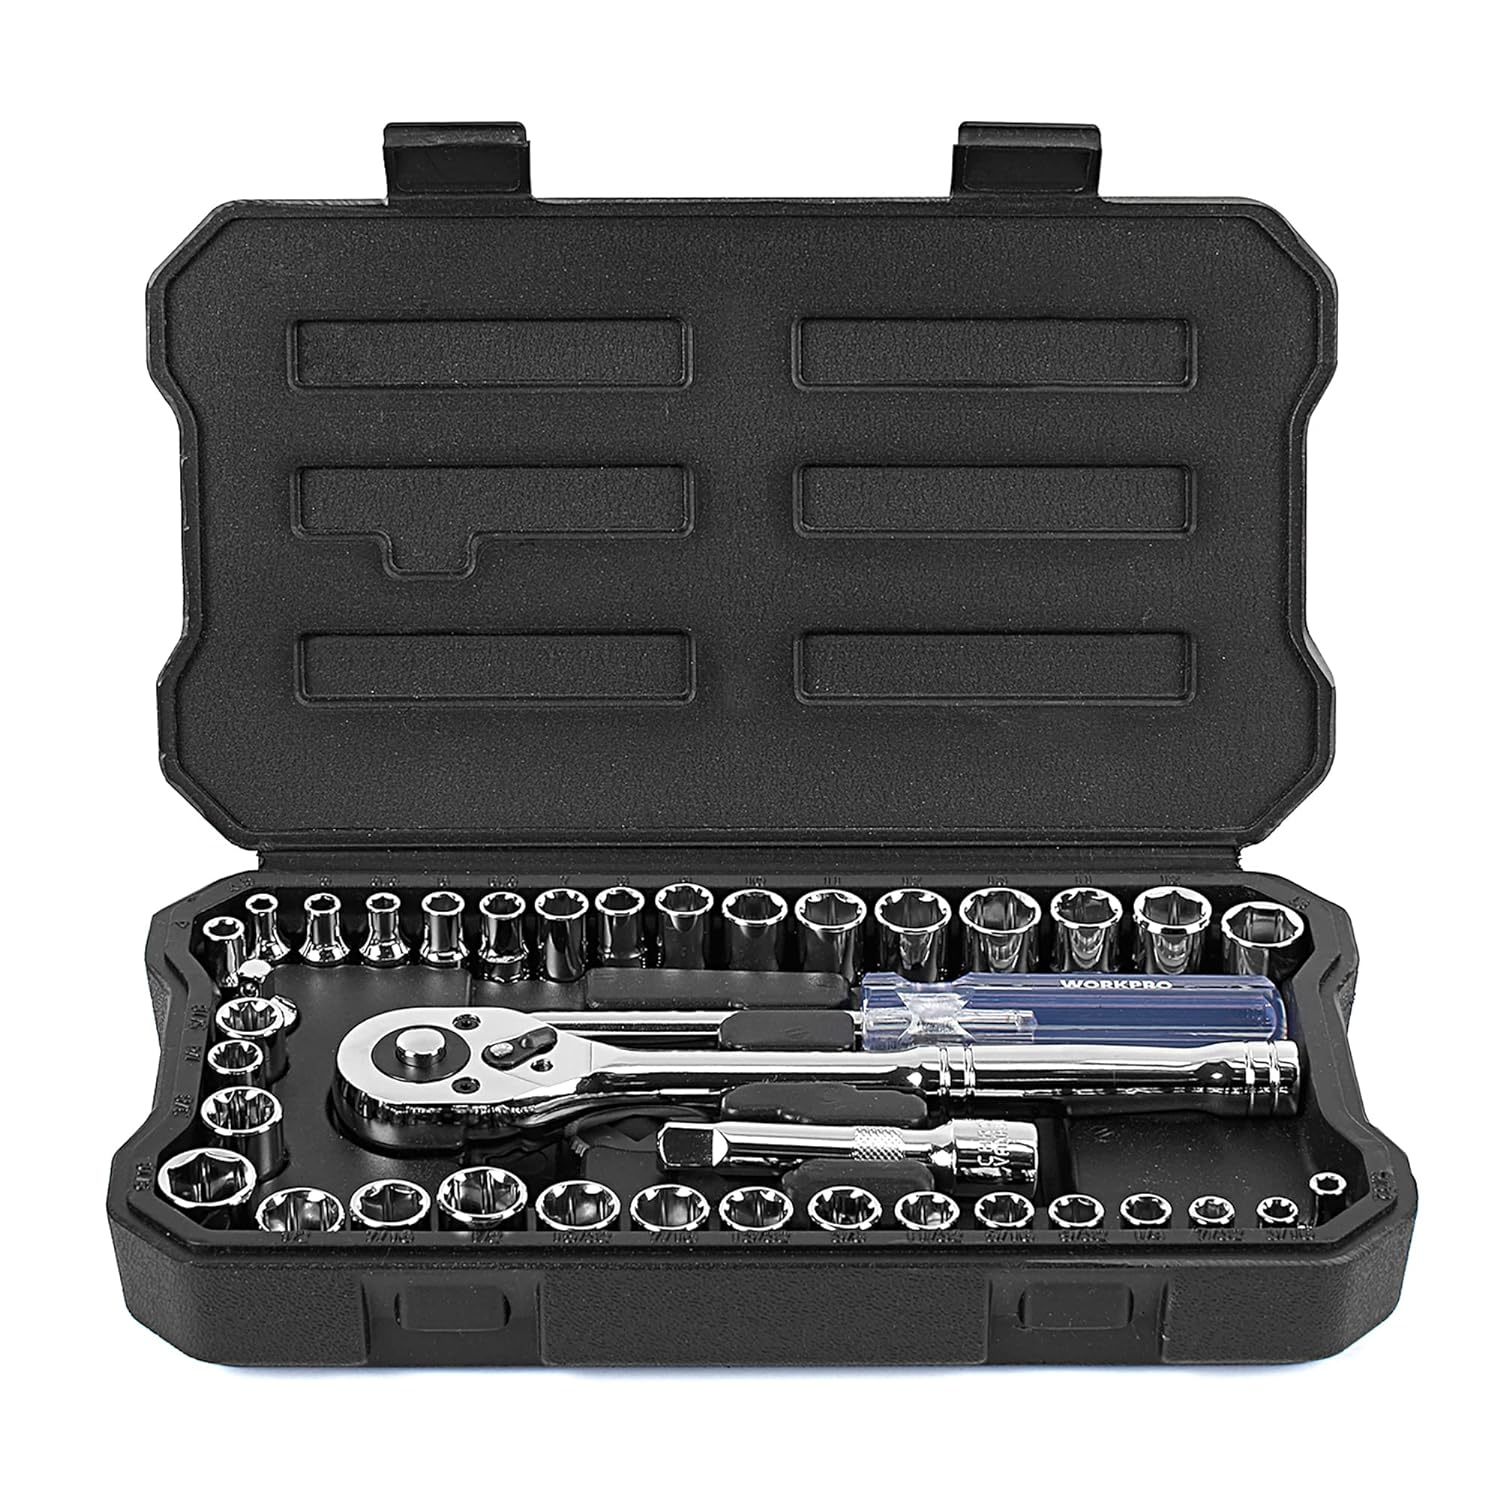 Primary image for WORKPRO 39-Piece Drive Socket Wrench Set, 1/4-Inch & 3/8-Inch Small Sockets Set,